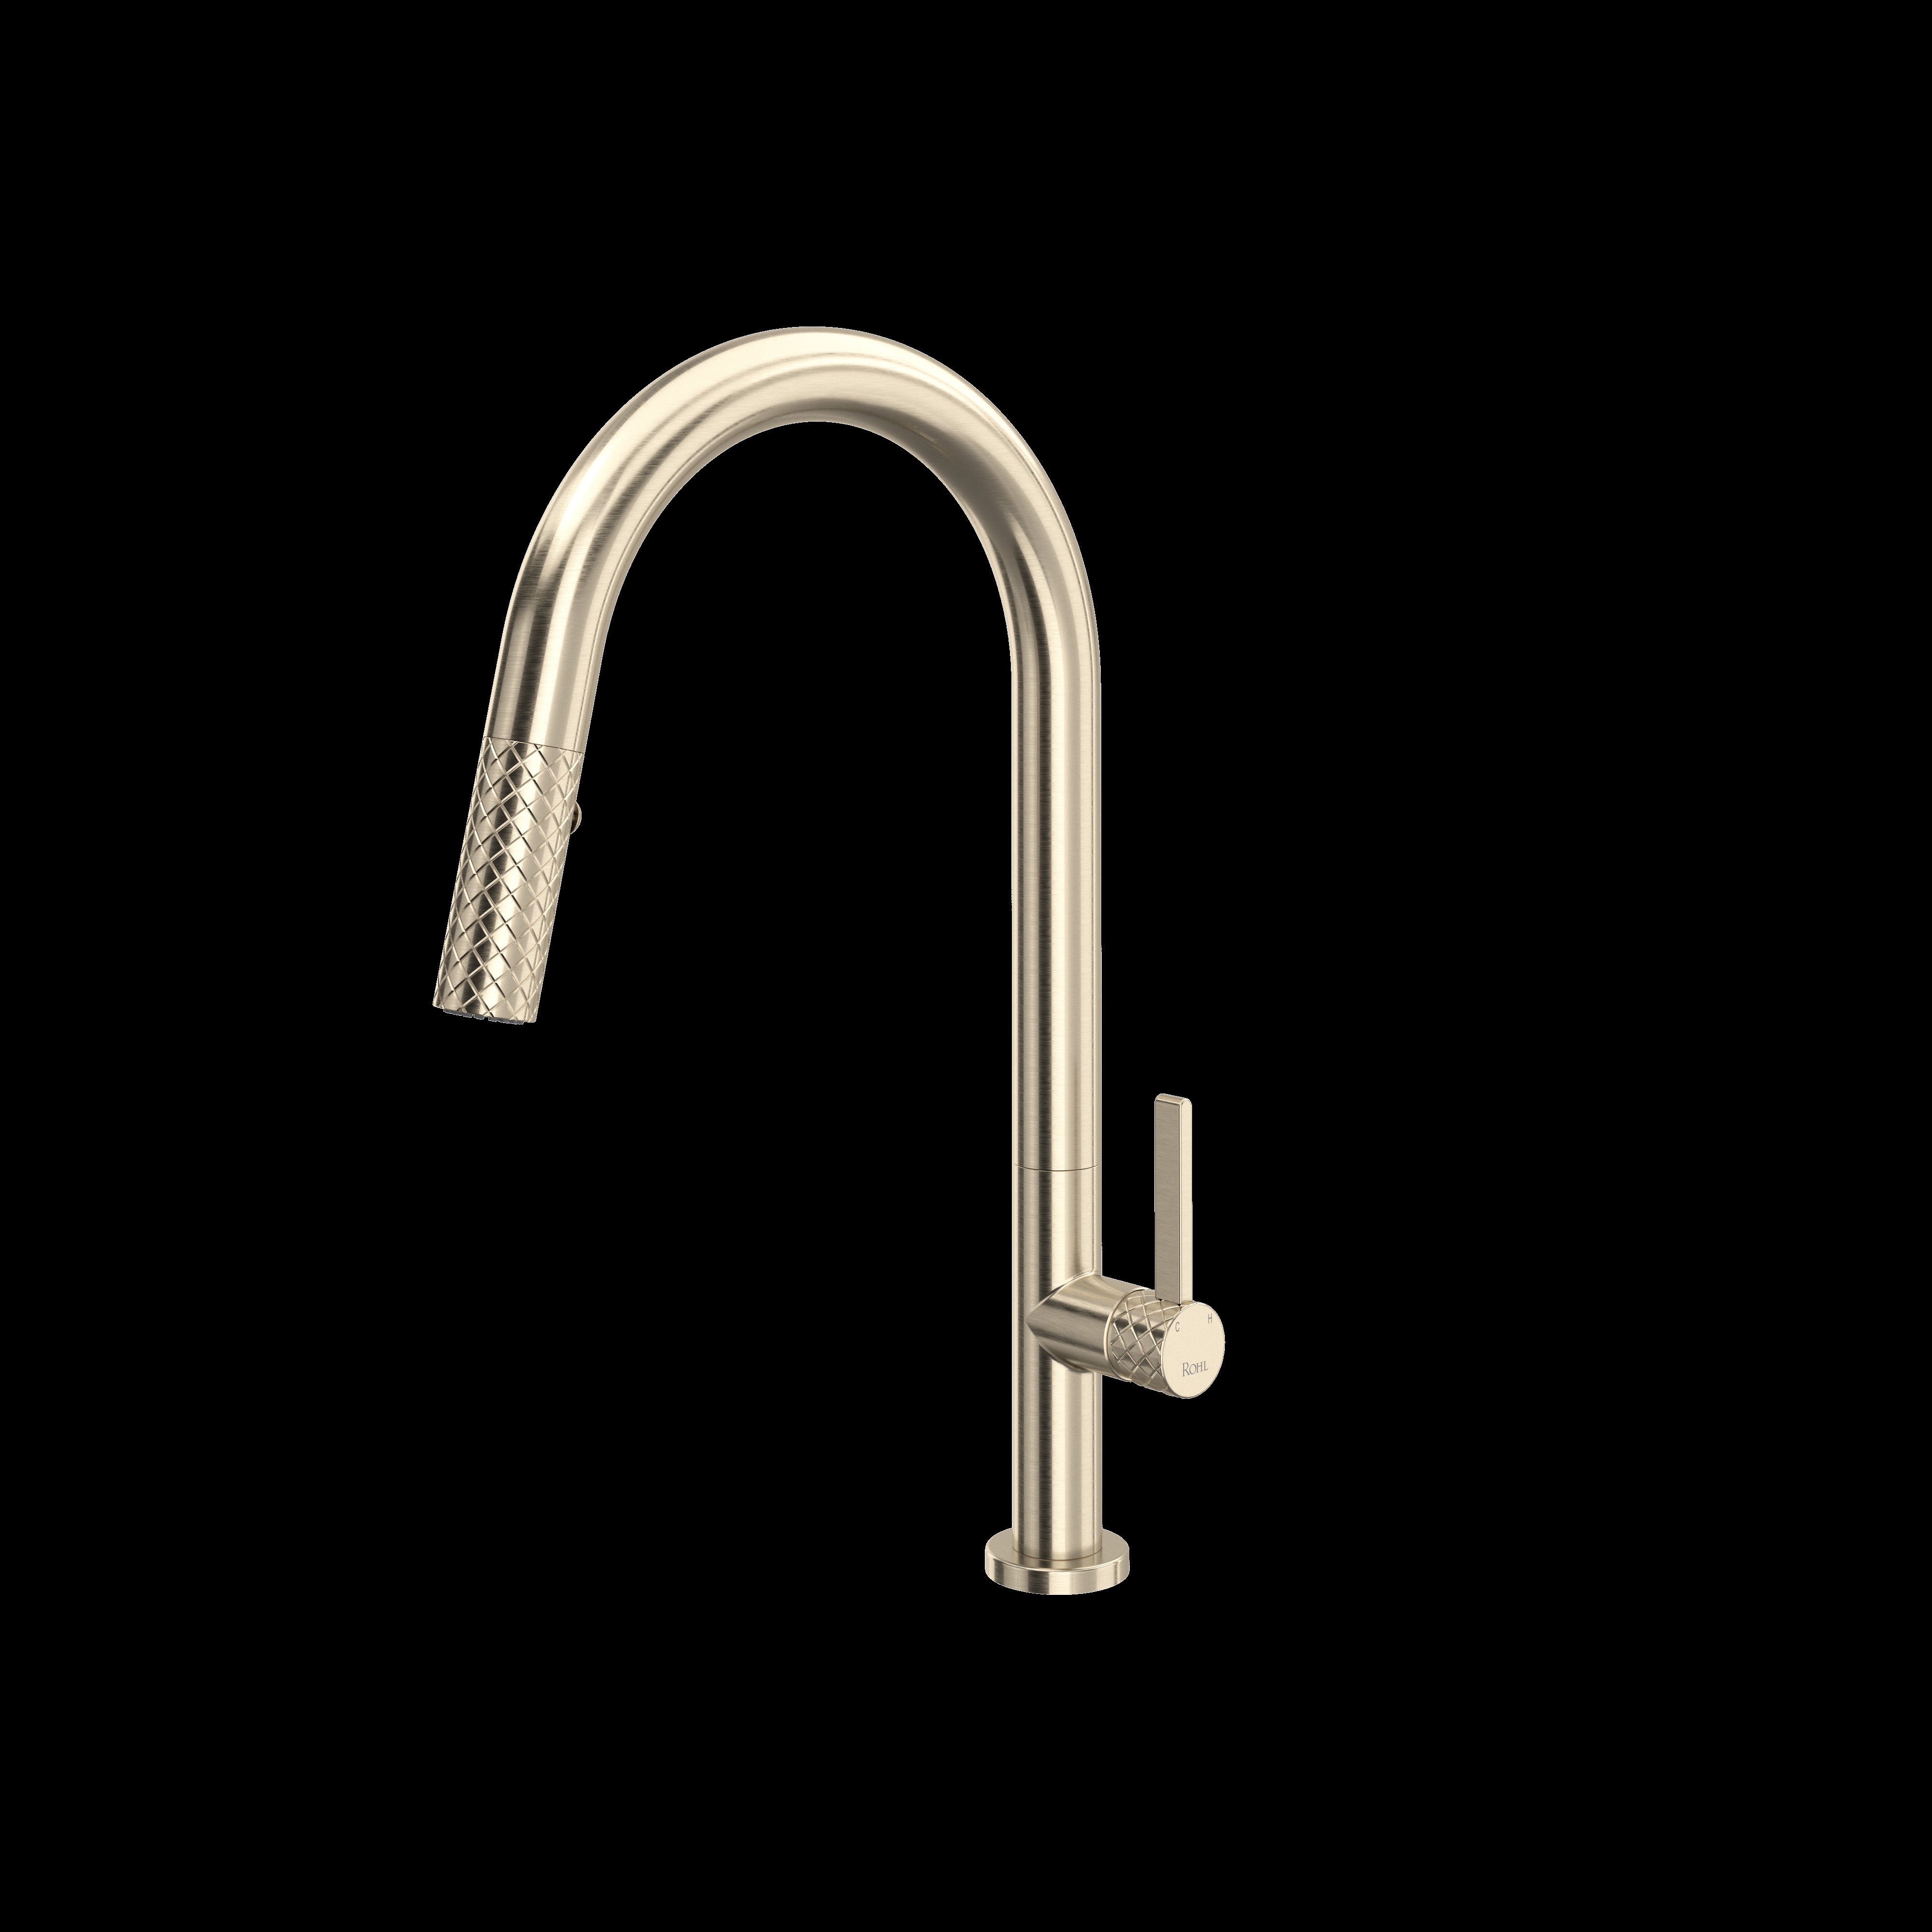 ROHL TE55D1 Tenerife Pull-Down Kitchen Faucet with C-Spout